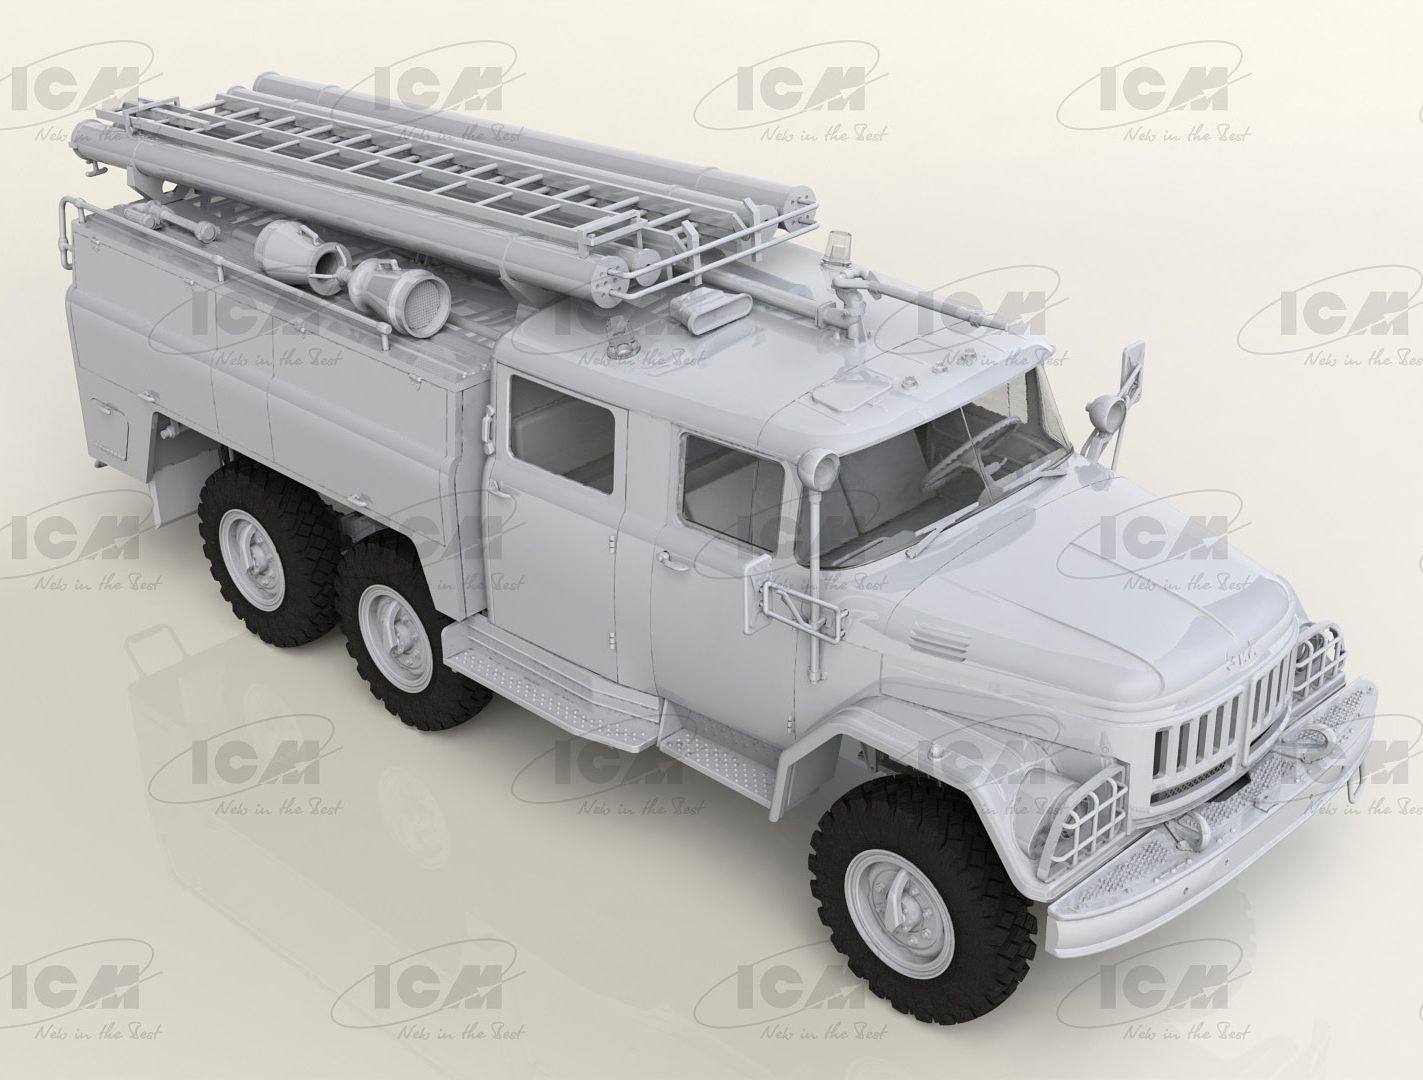 ICM 1:35 Chernobyl #2. Fire Fighters (AC-40-137A Firetruck & 4 Figures & Diorama Base with Background)